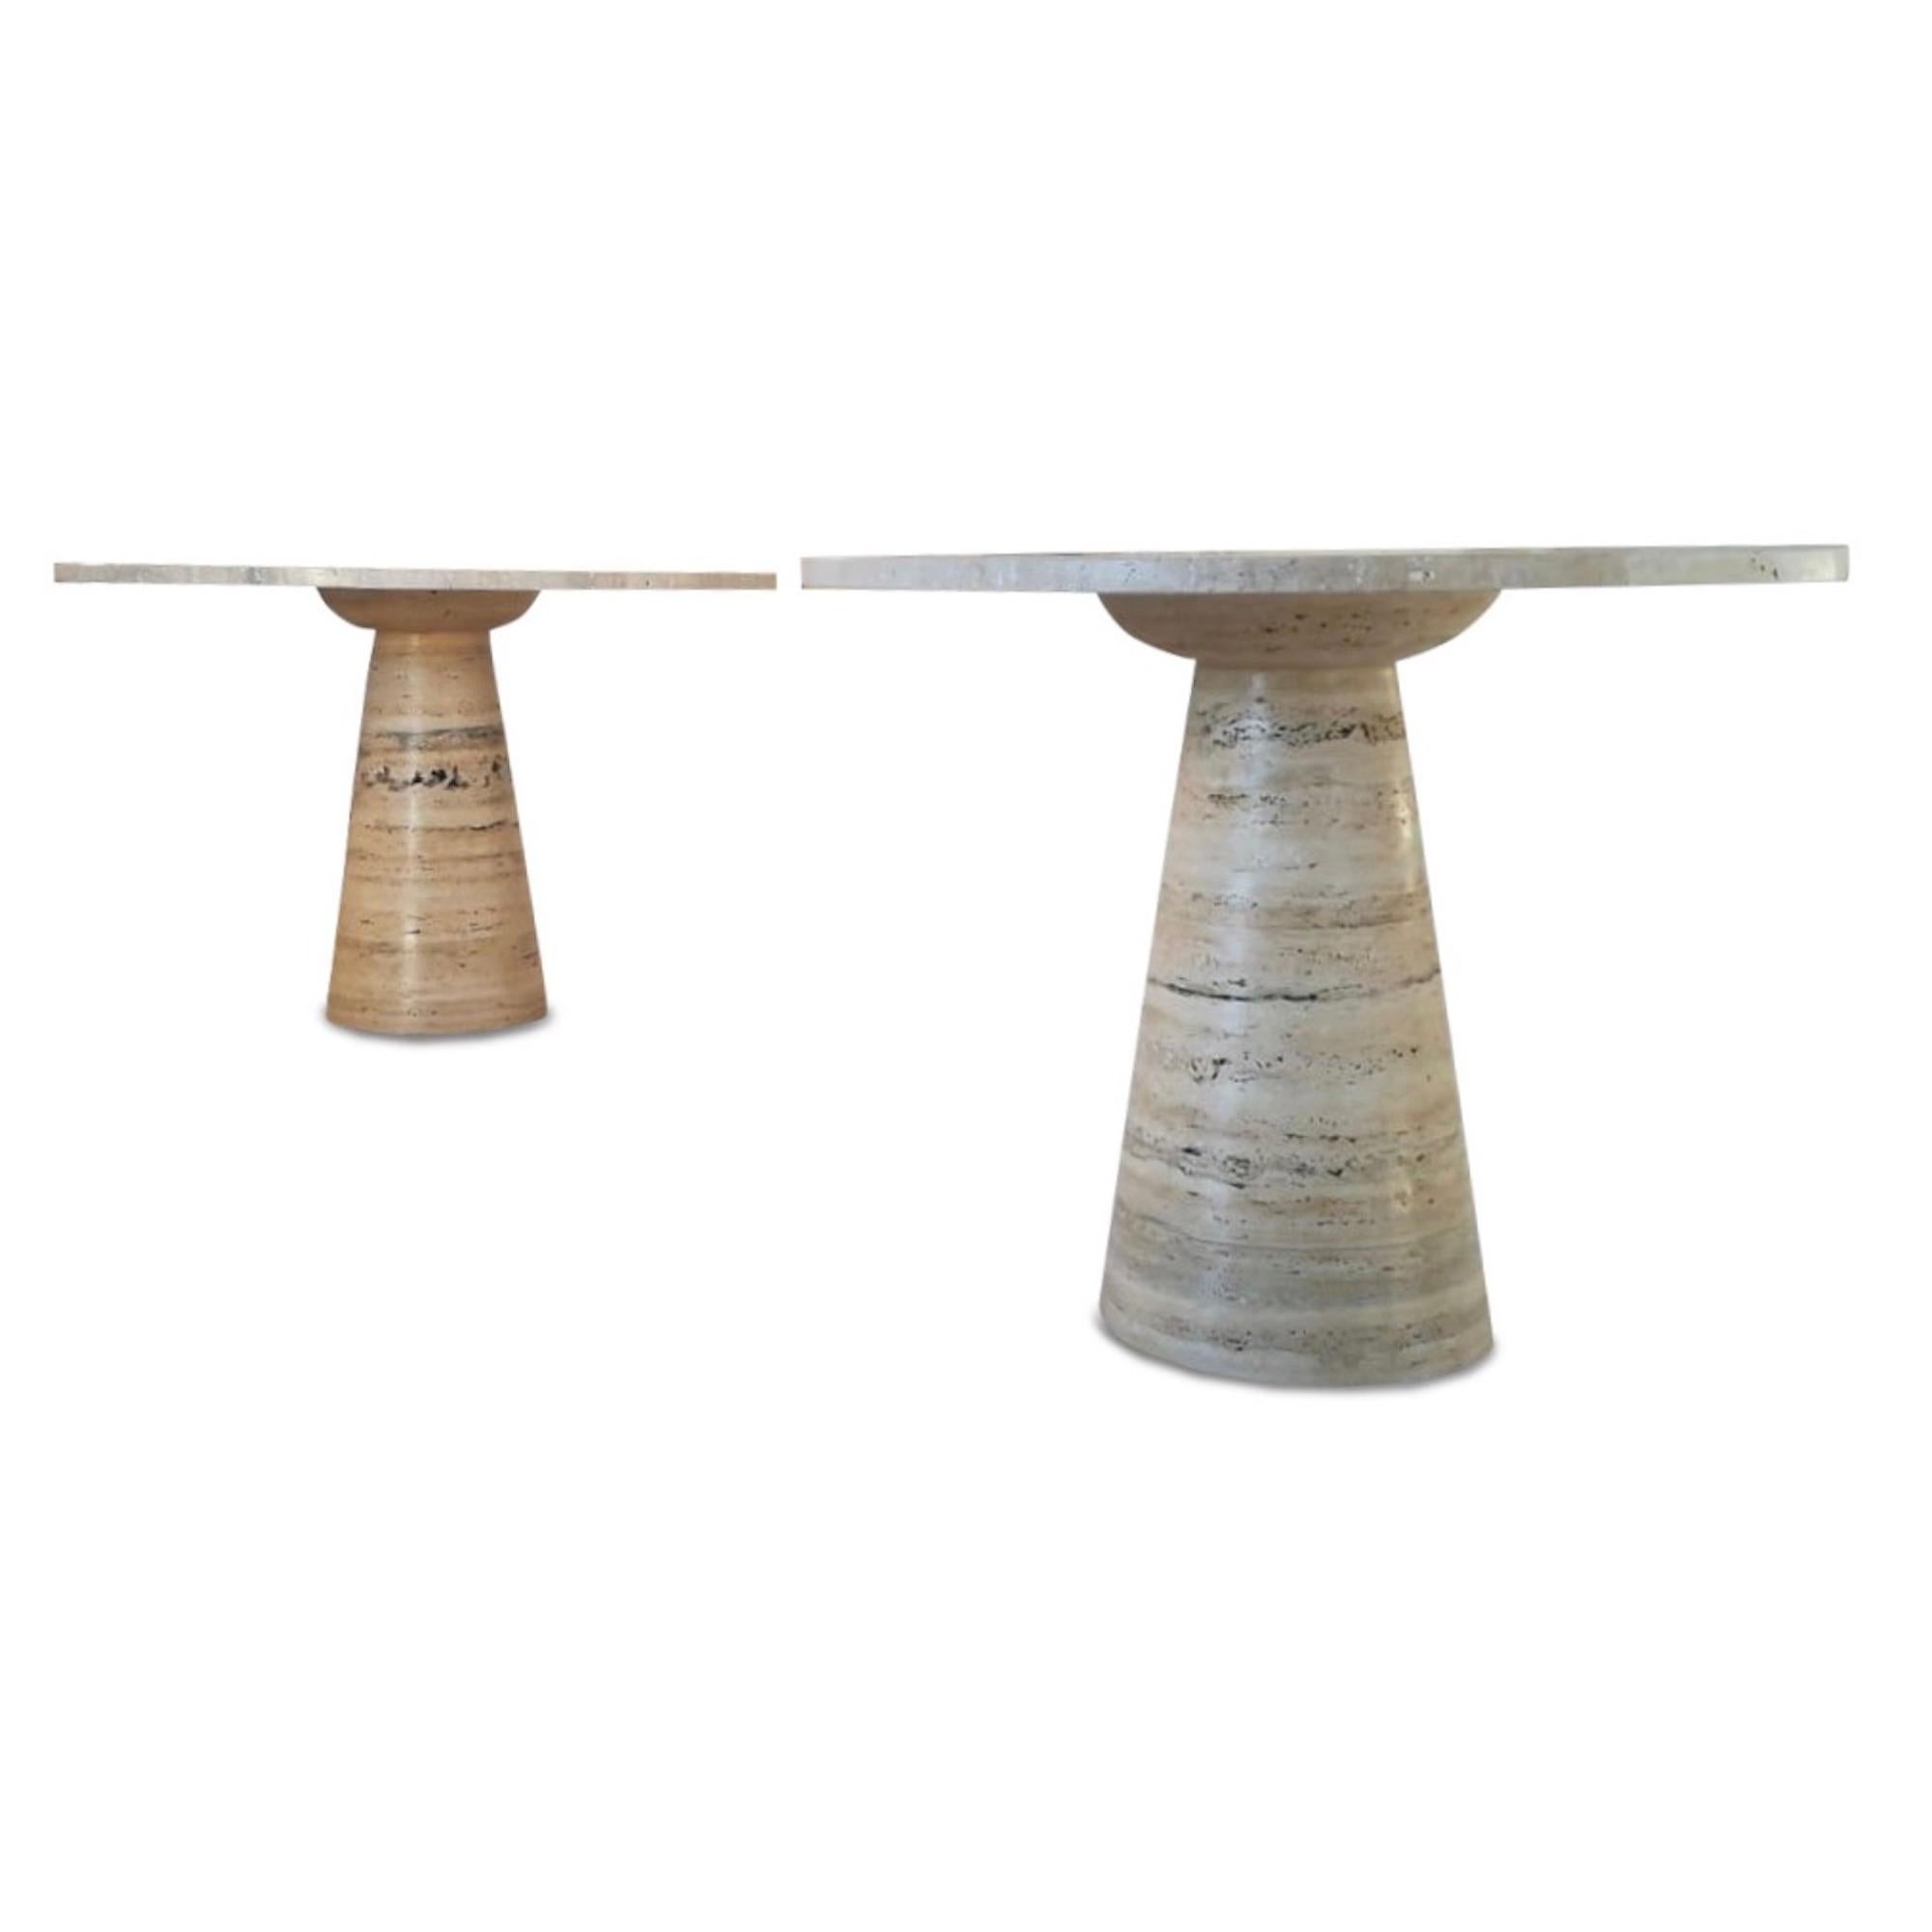 Travertine dining table

Made to order in Italy

Round top

Solid travertine pedestal

Diameter can be specified.